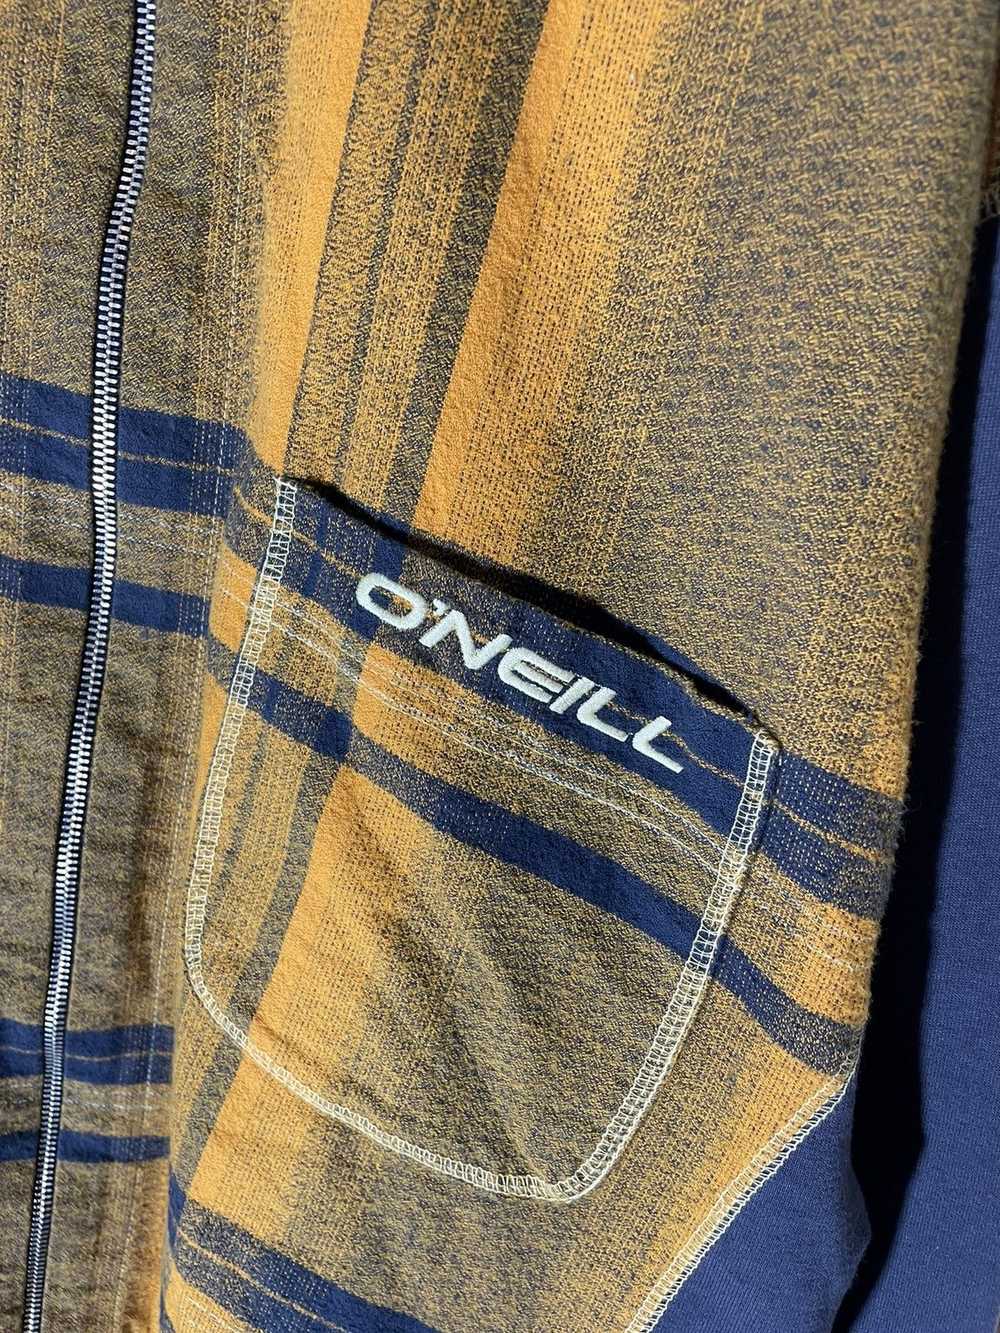 Oneill × Surf Style × Vintage O’Neill vintage sur… - image 4